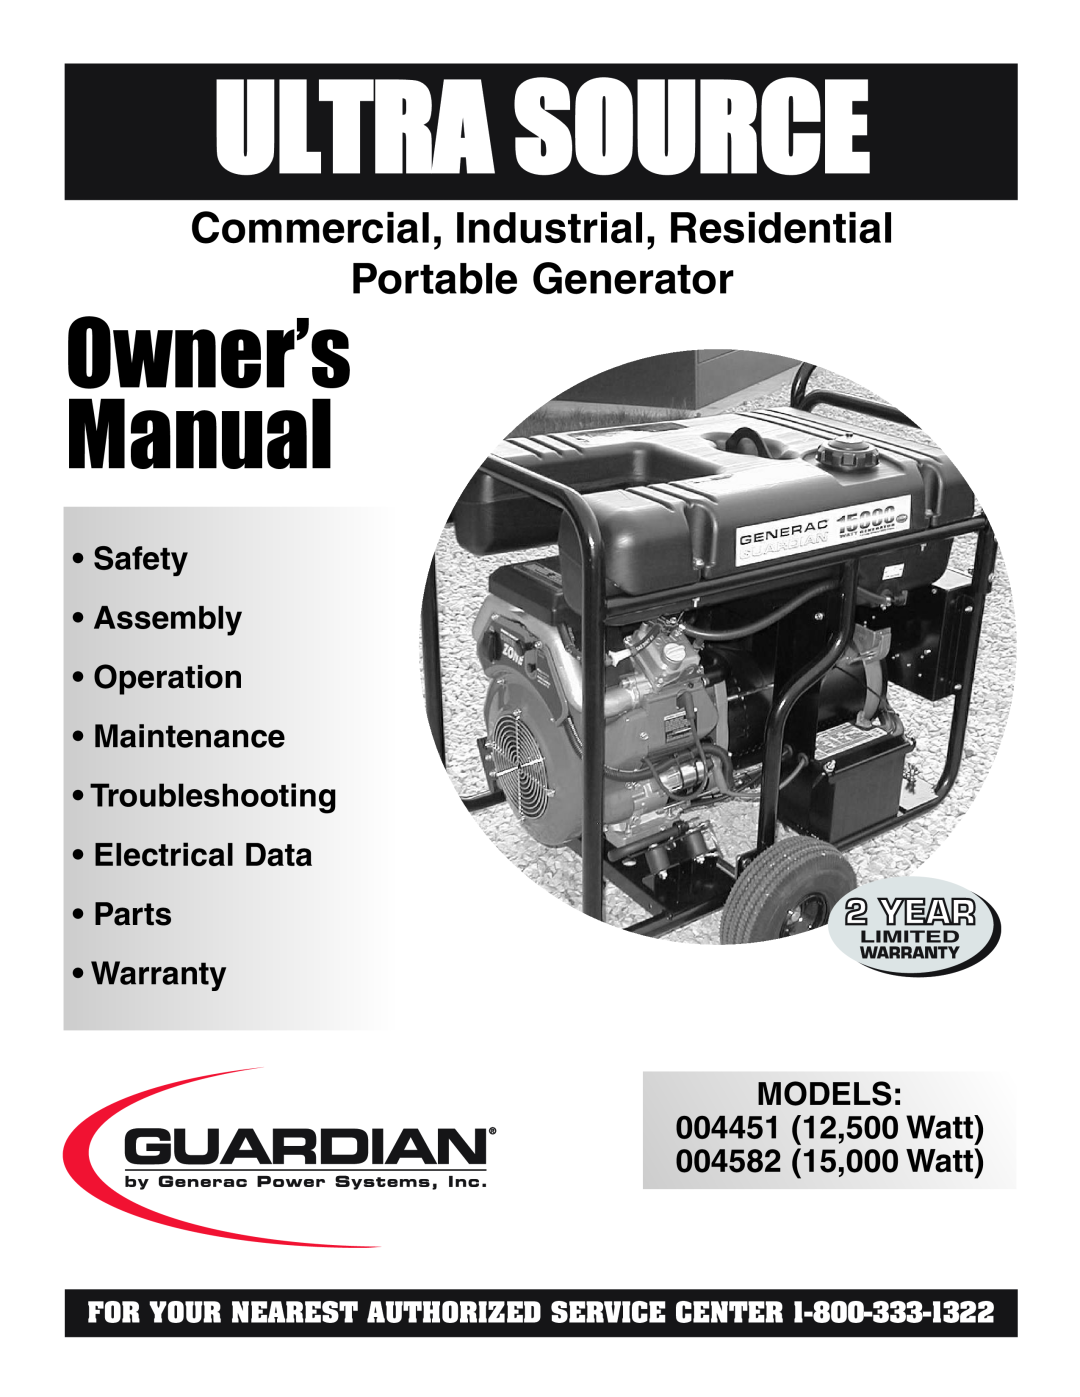 Generac 004451, 004582 owner manual Ultra Source, Commercial, Industrial, Residential Portable Generator, Parts Warranty 